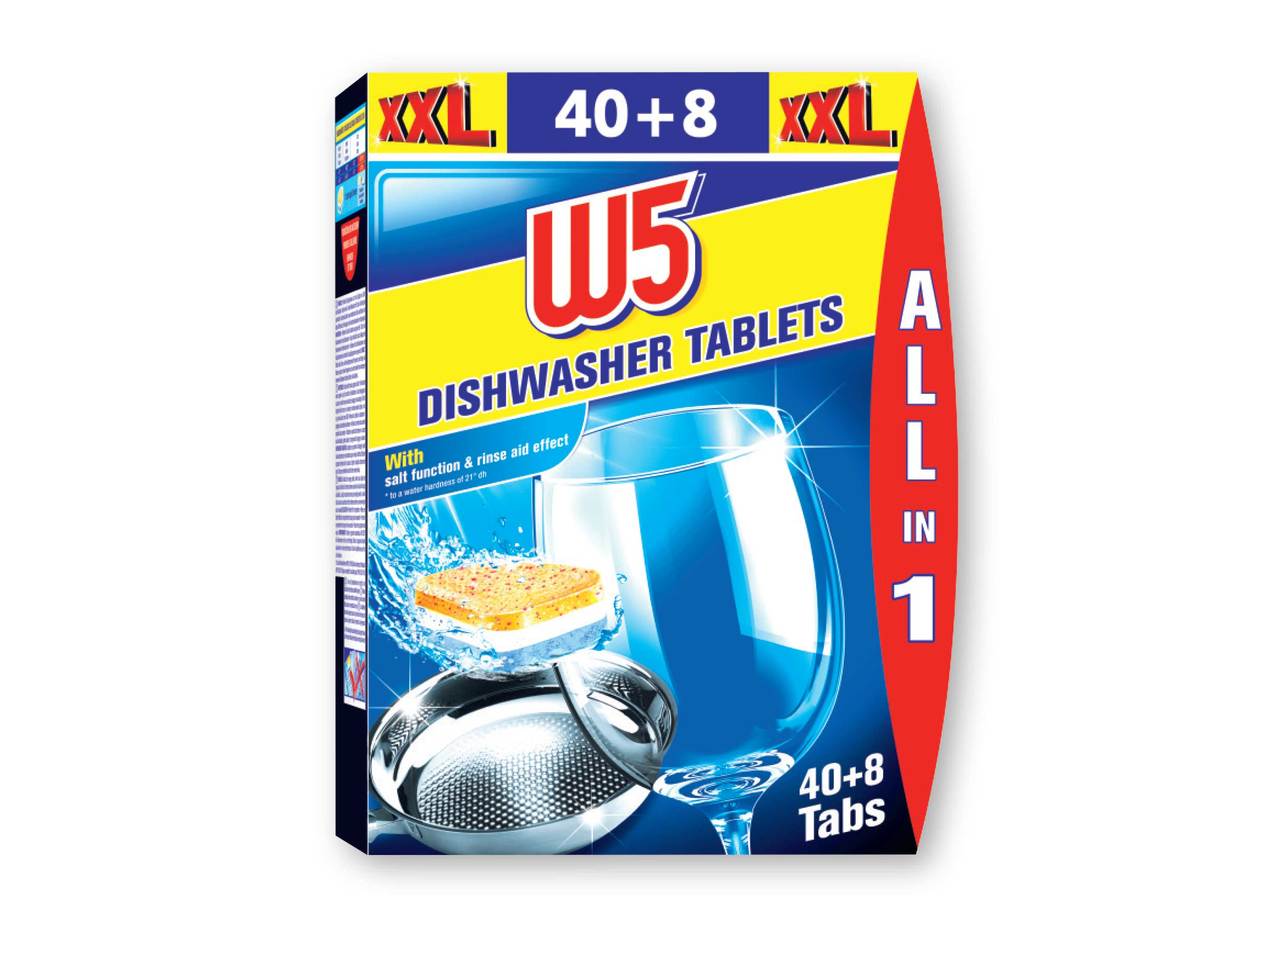 W5(R) All In One Dishwasher Tablets